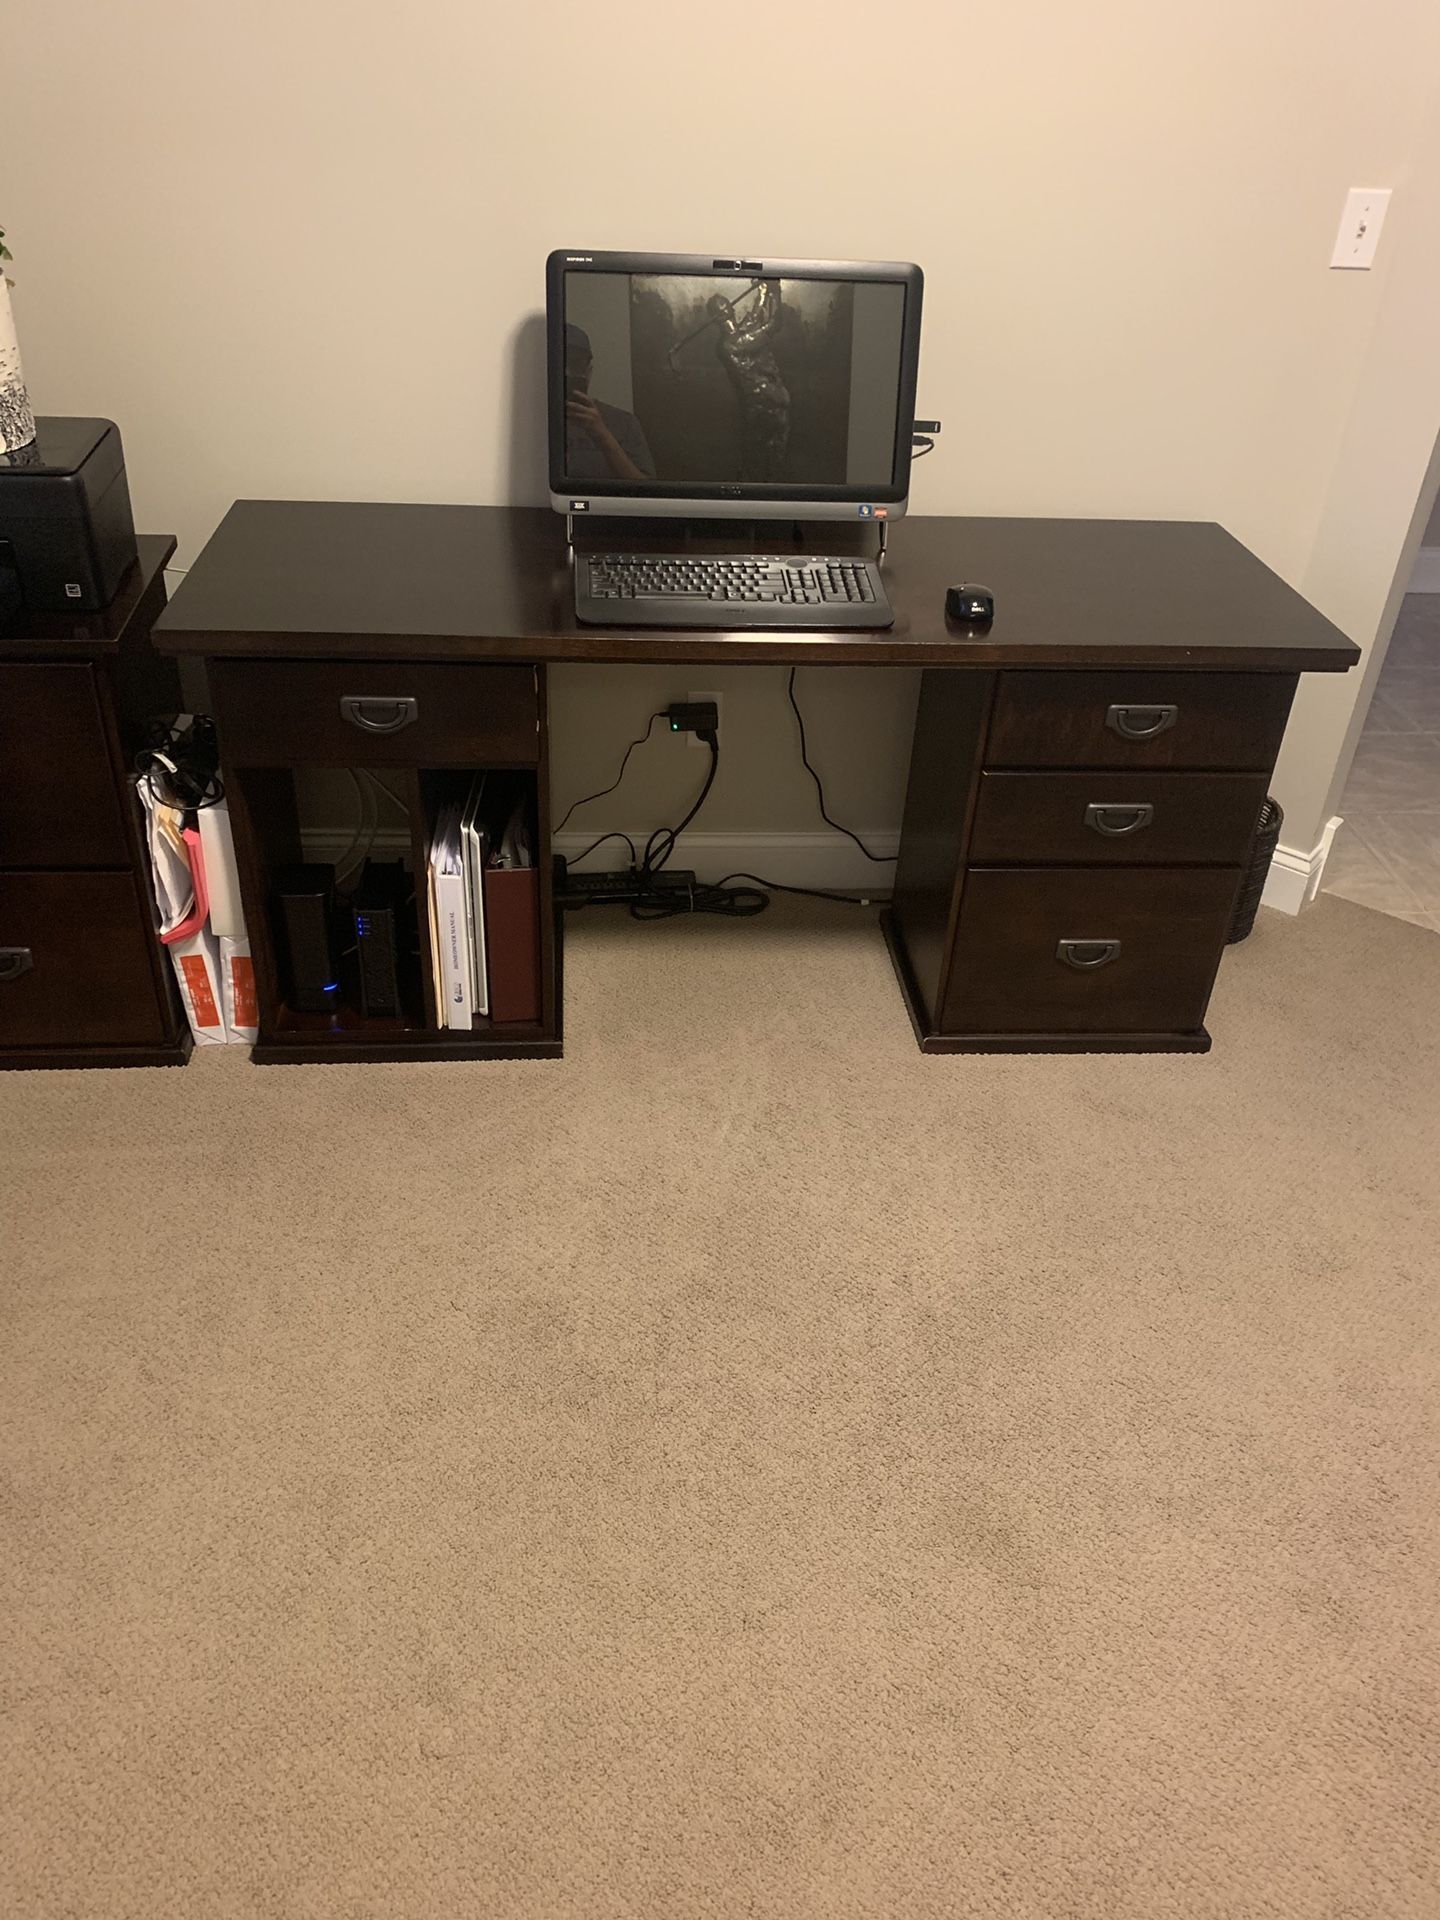 Office furniture for sale. Items include 2 desks, file cabinet, and a hutch. All pieces are interchangeable and are in pristine condition. The des